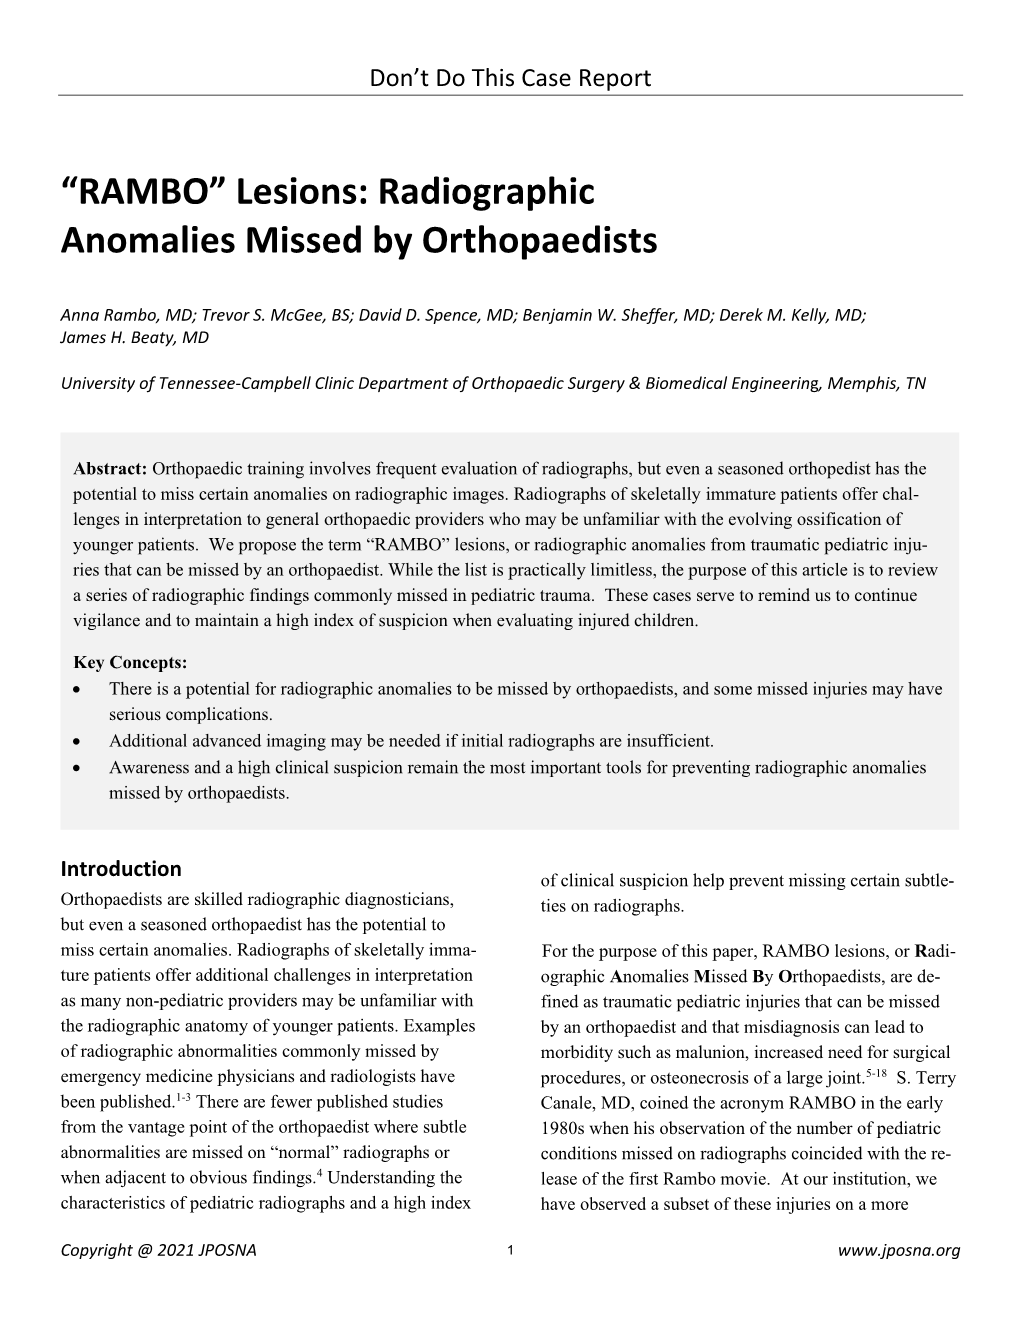 “RAMBO” Lesions: Radiographic Anomalies Missed by Orthopaedists